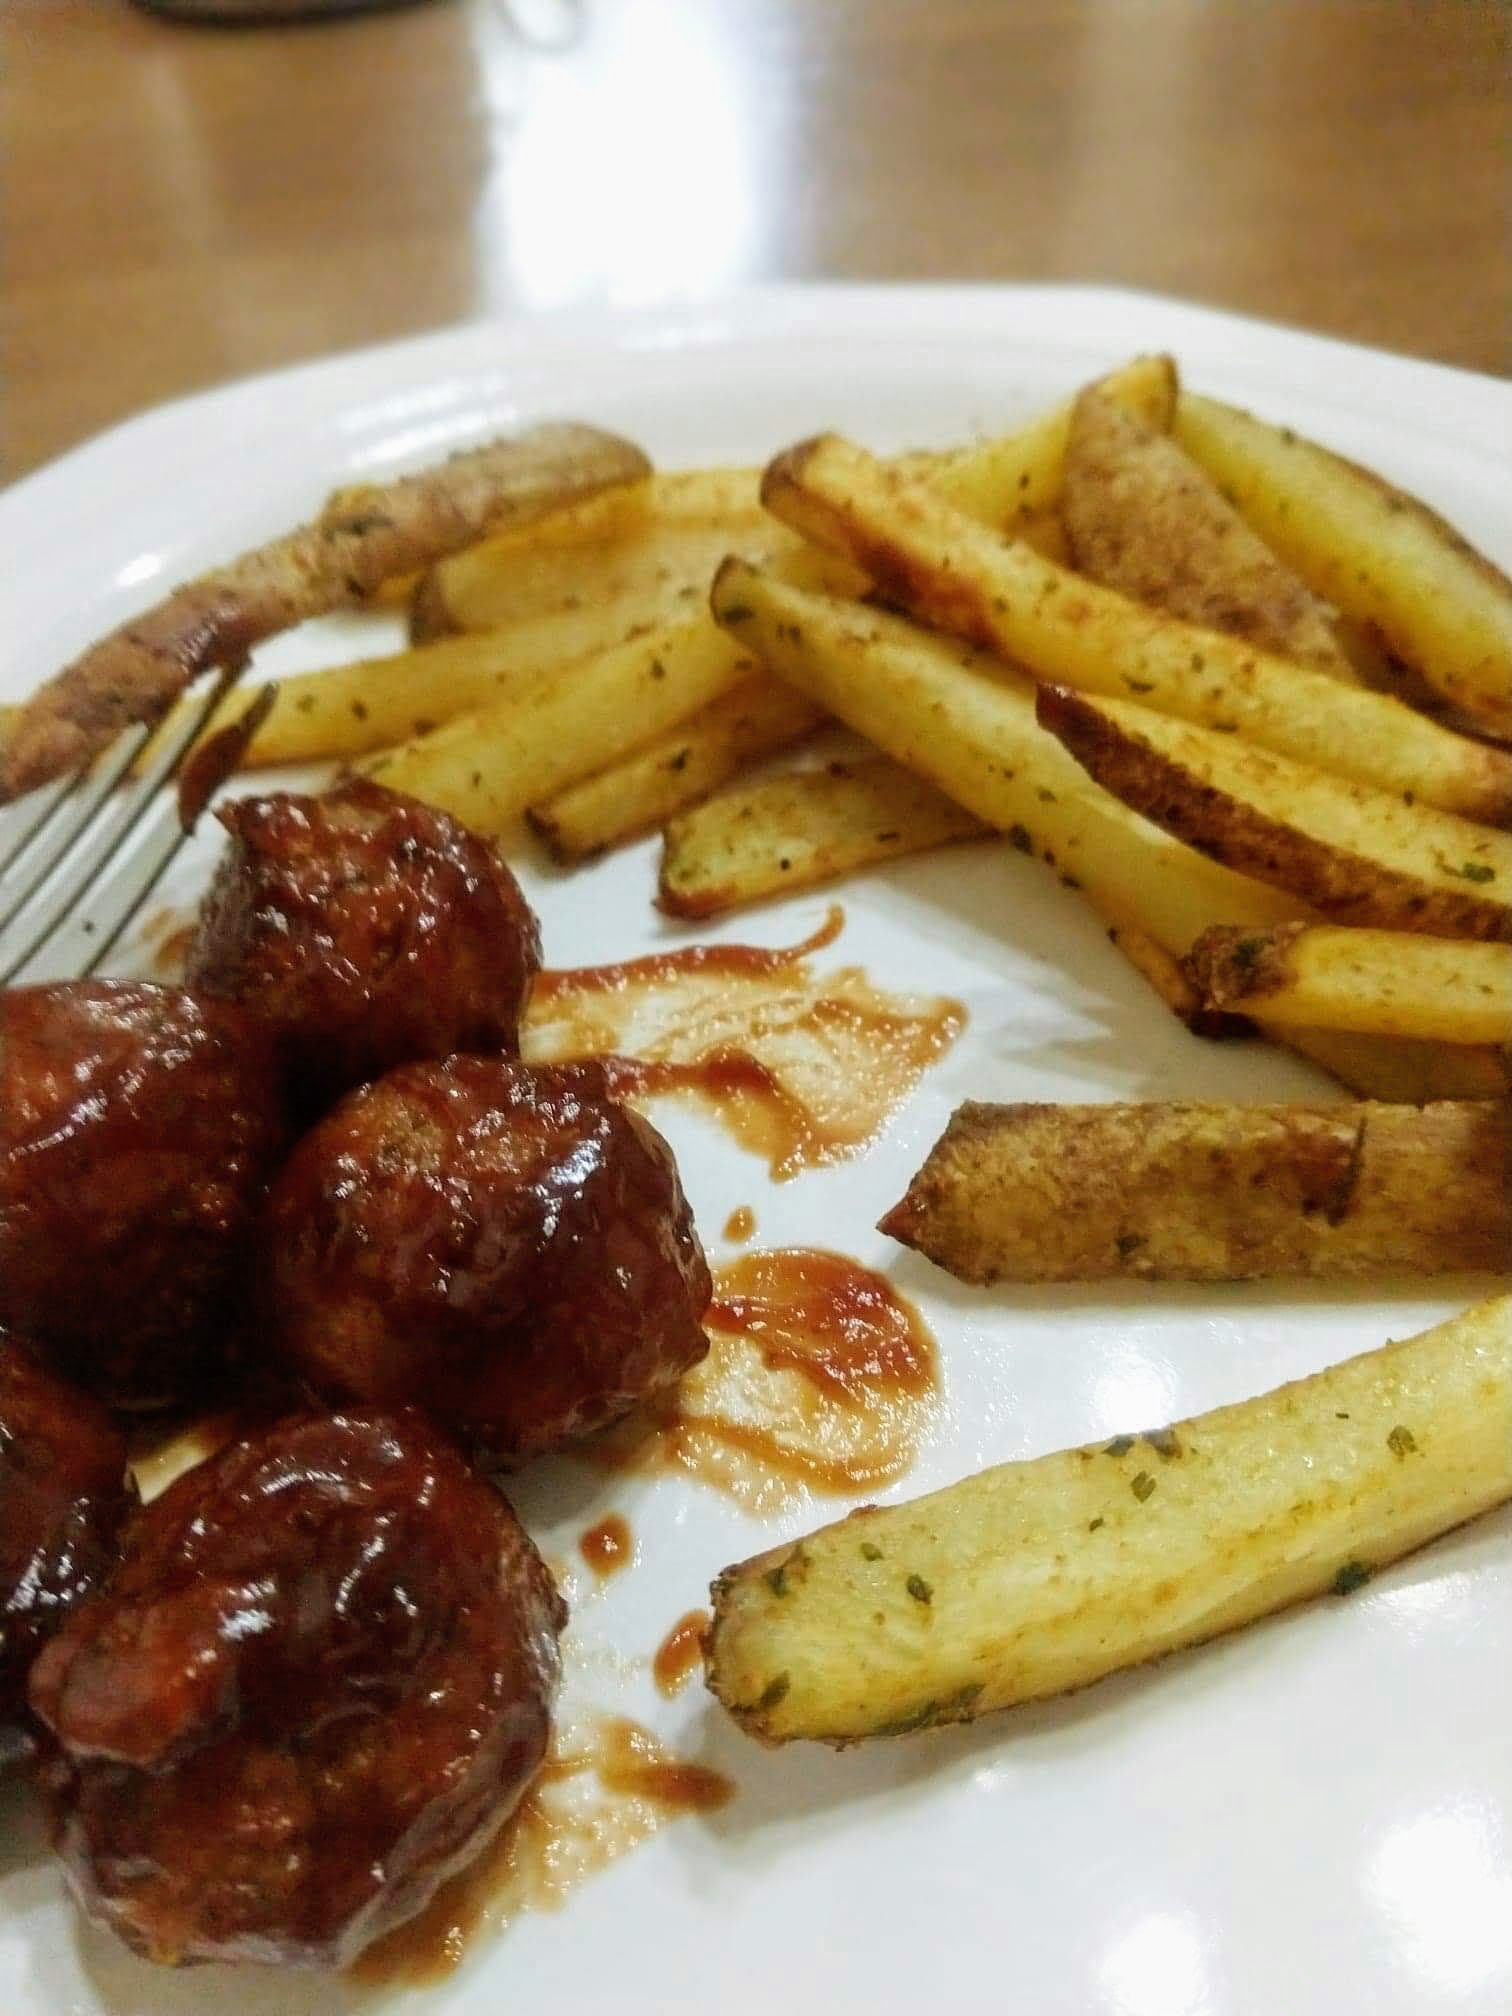 Meatless meatballs plated with homemade french fries